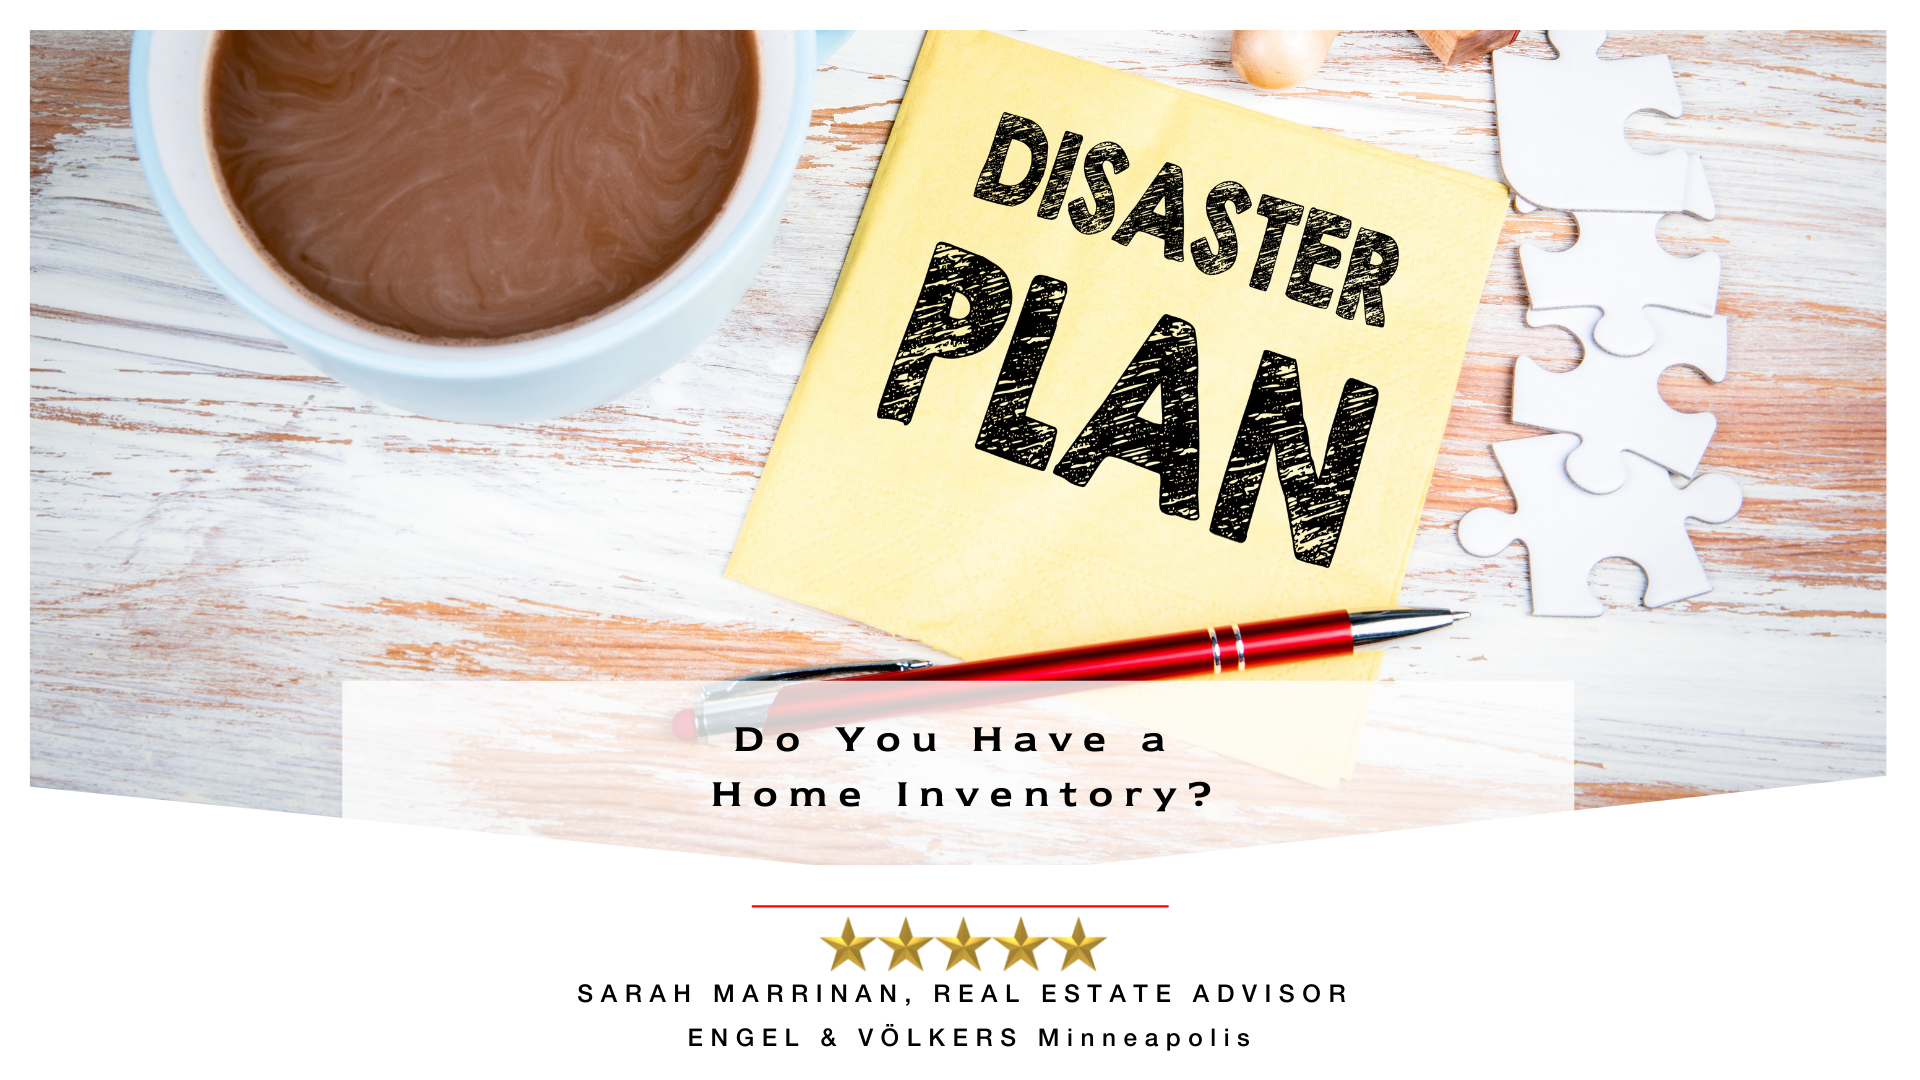 Disaster Prep: Do You Have a Home Inventory?